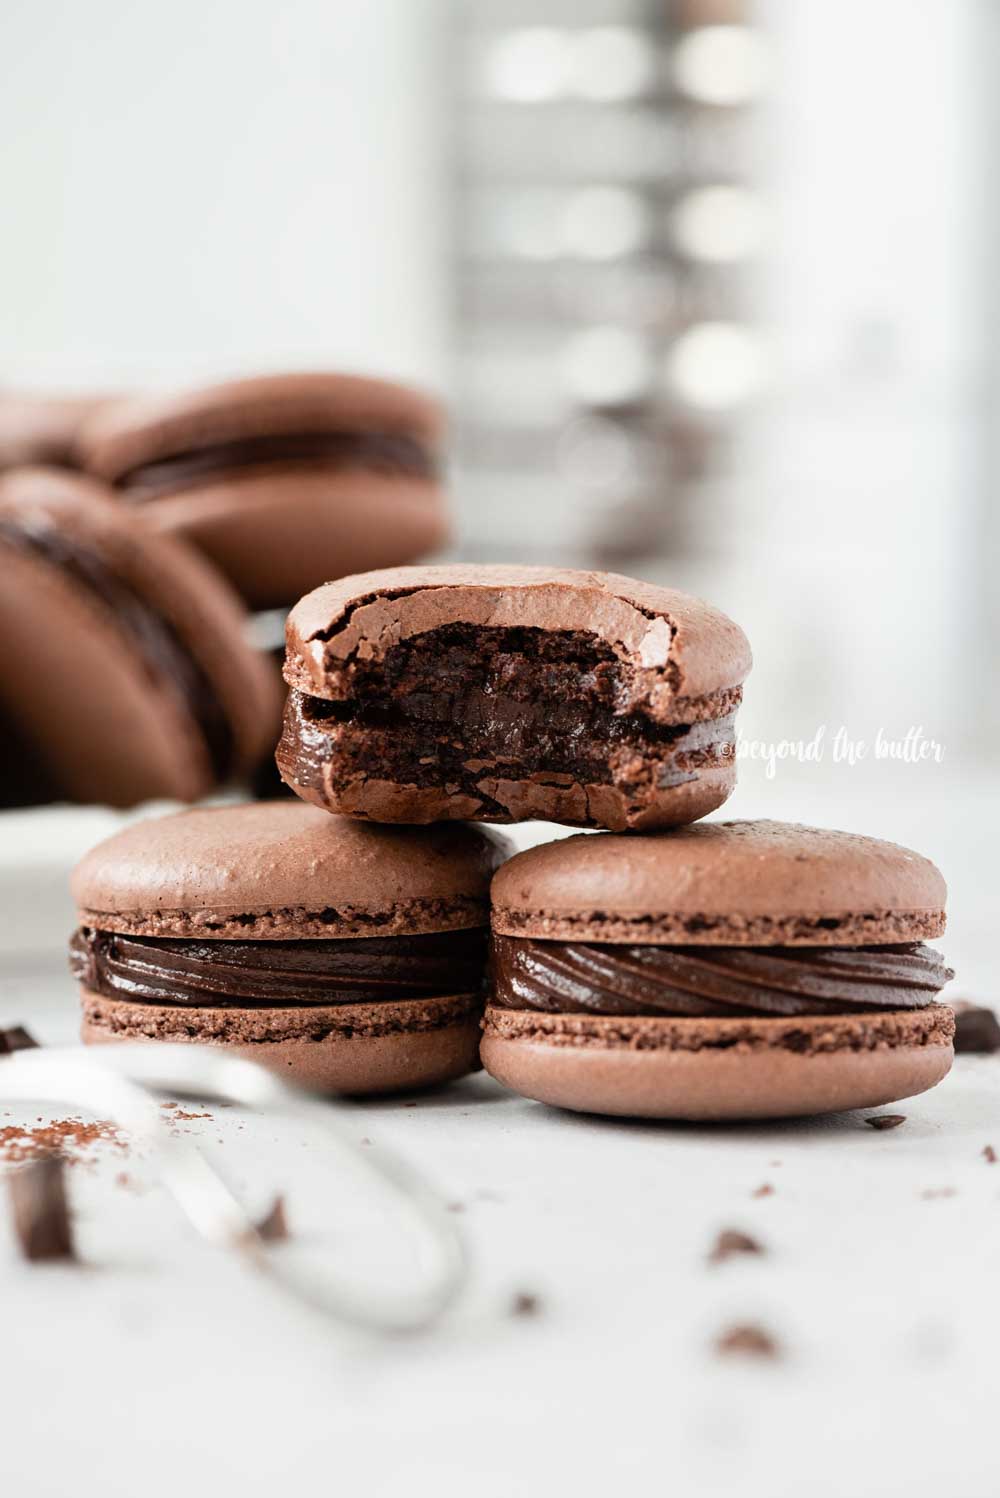 Small stack of chocolate macarons with a bite taken out of the top macaron with a bigger stack in the background with a sifter | All Images © Beyond the Butter™